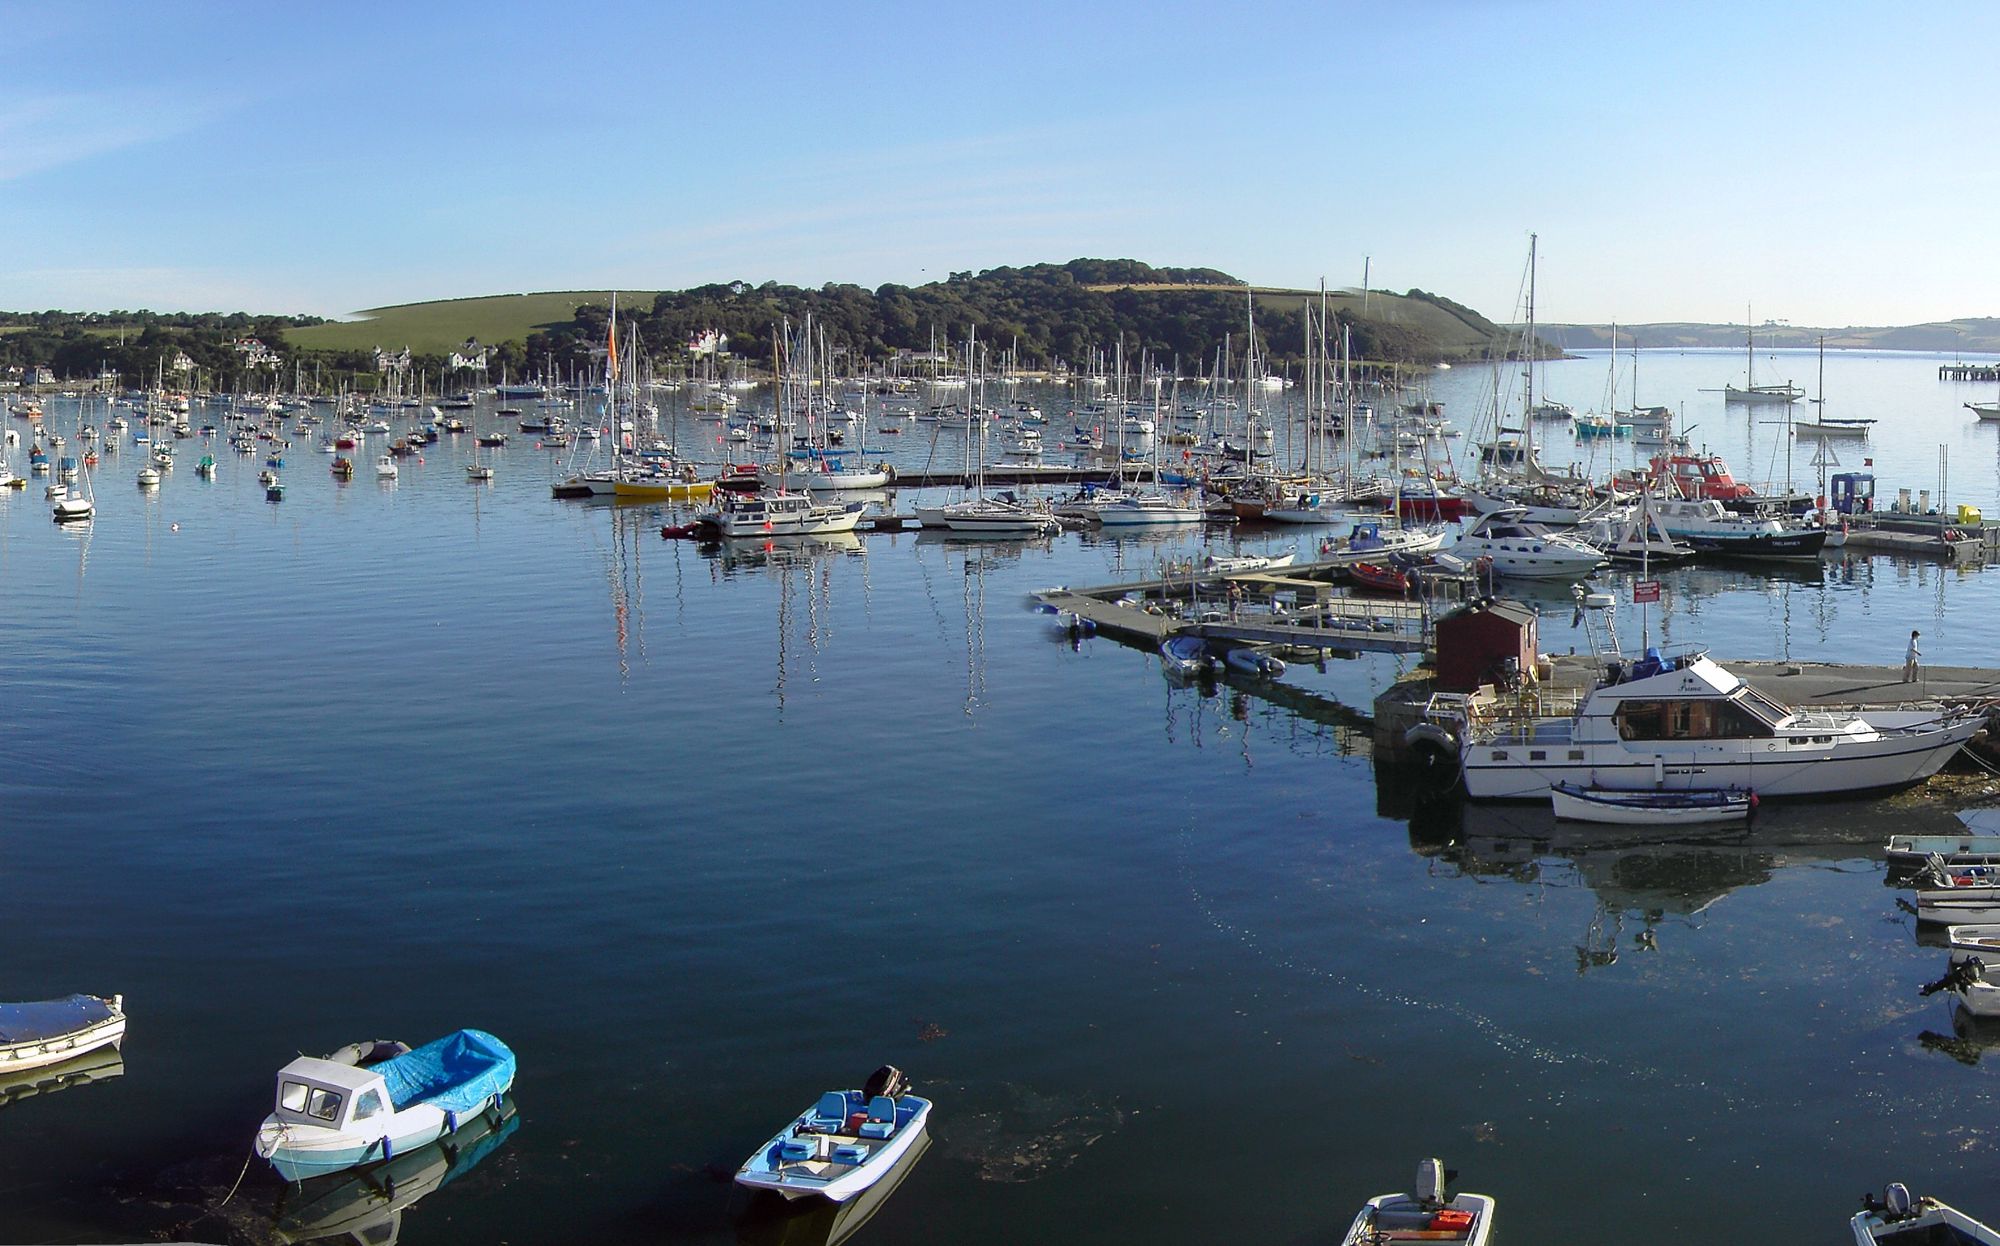 Hotels, B&Bs & Self-Catering in Falmouth